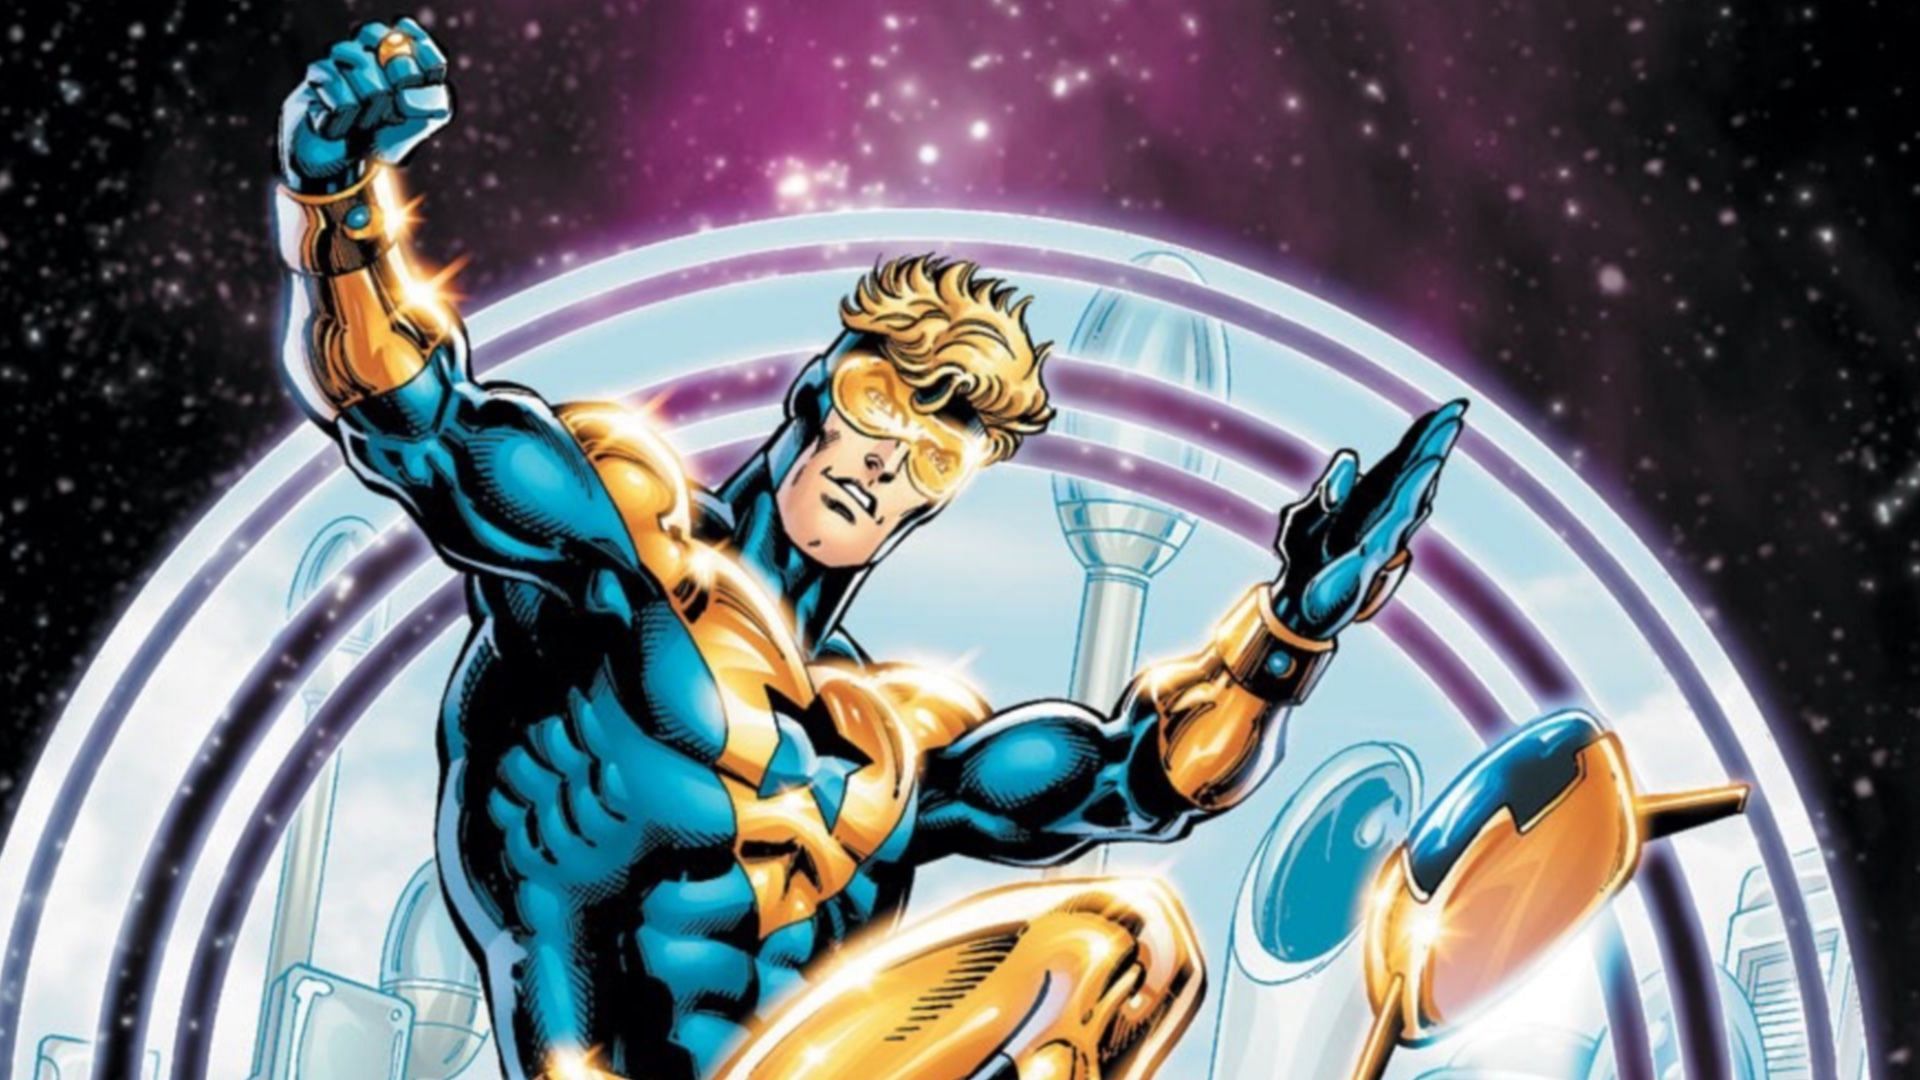 Booster Gold, the time-traveling hero from DC Comics, strikes a pose in his iconic gold and blue suit (Image via DC Comics)